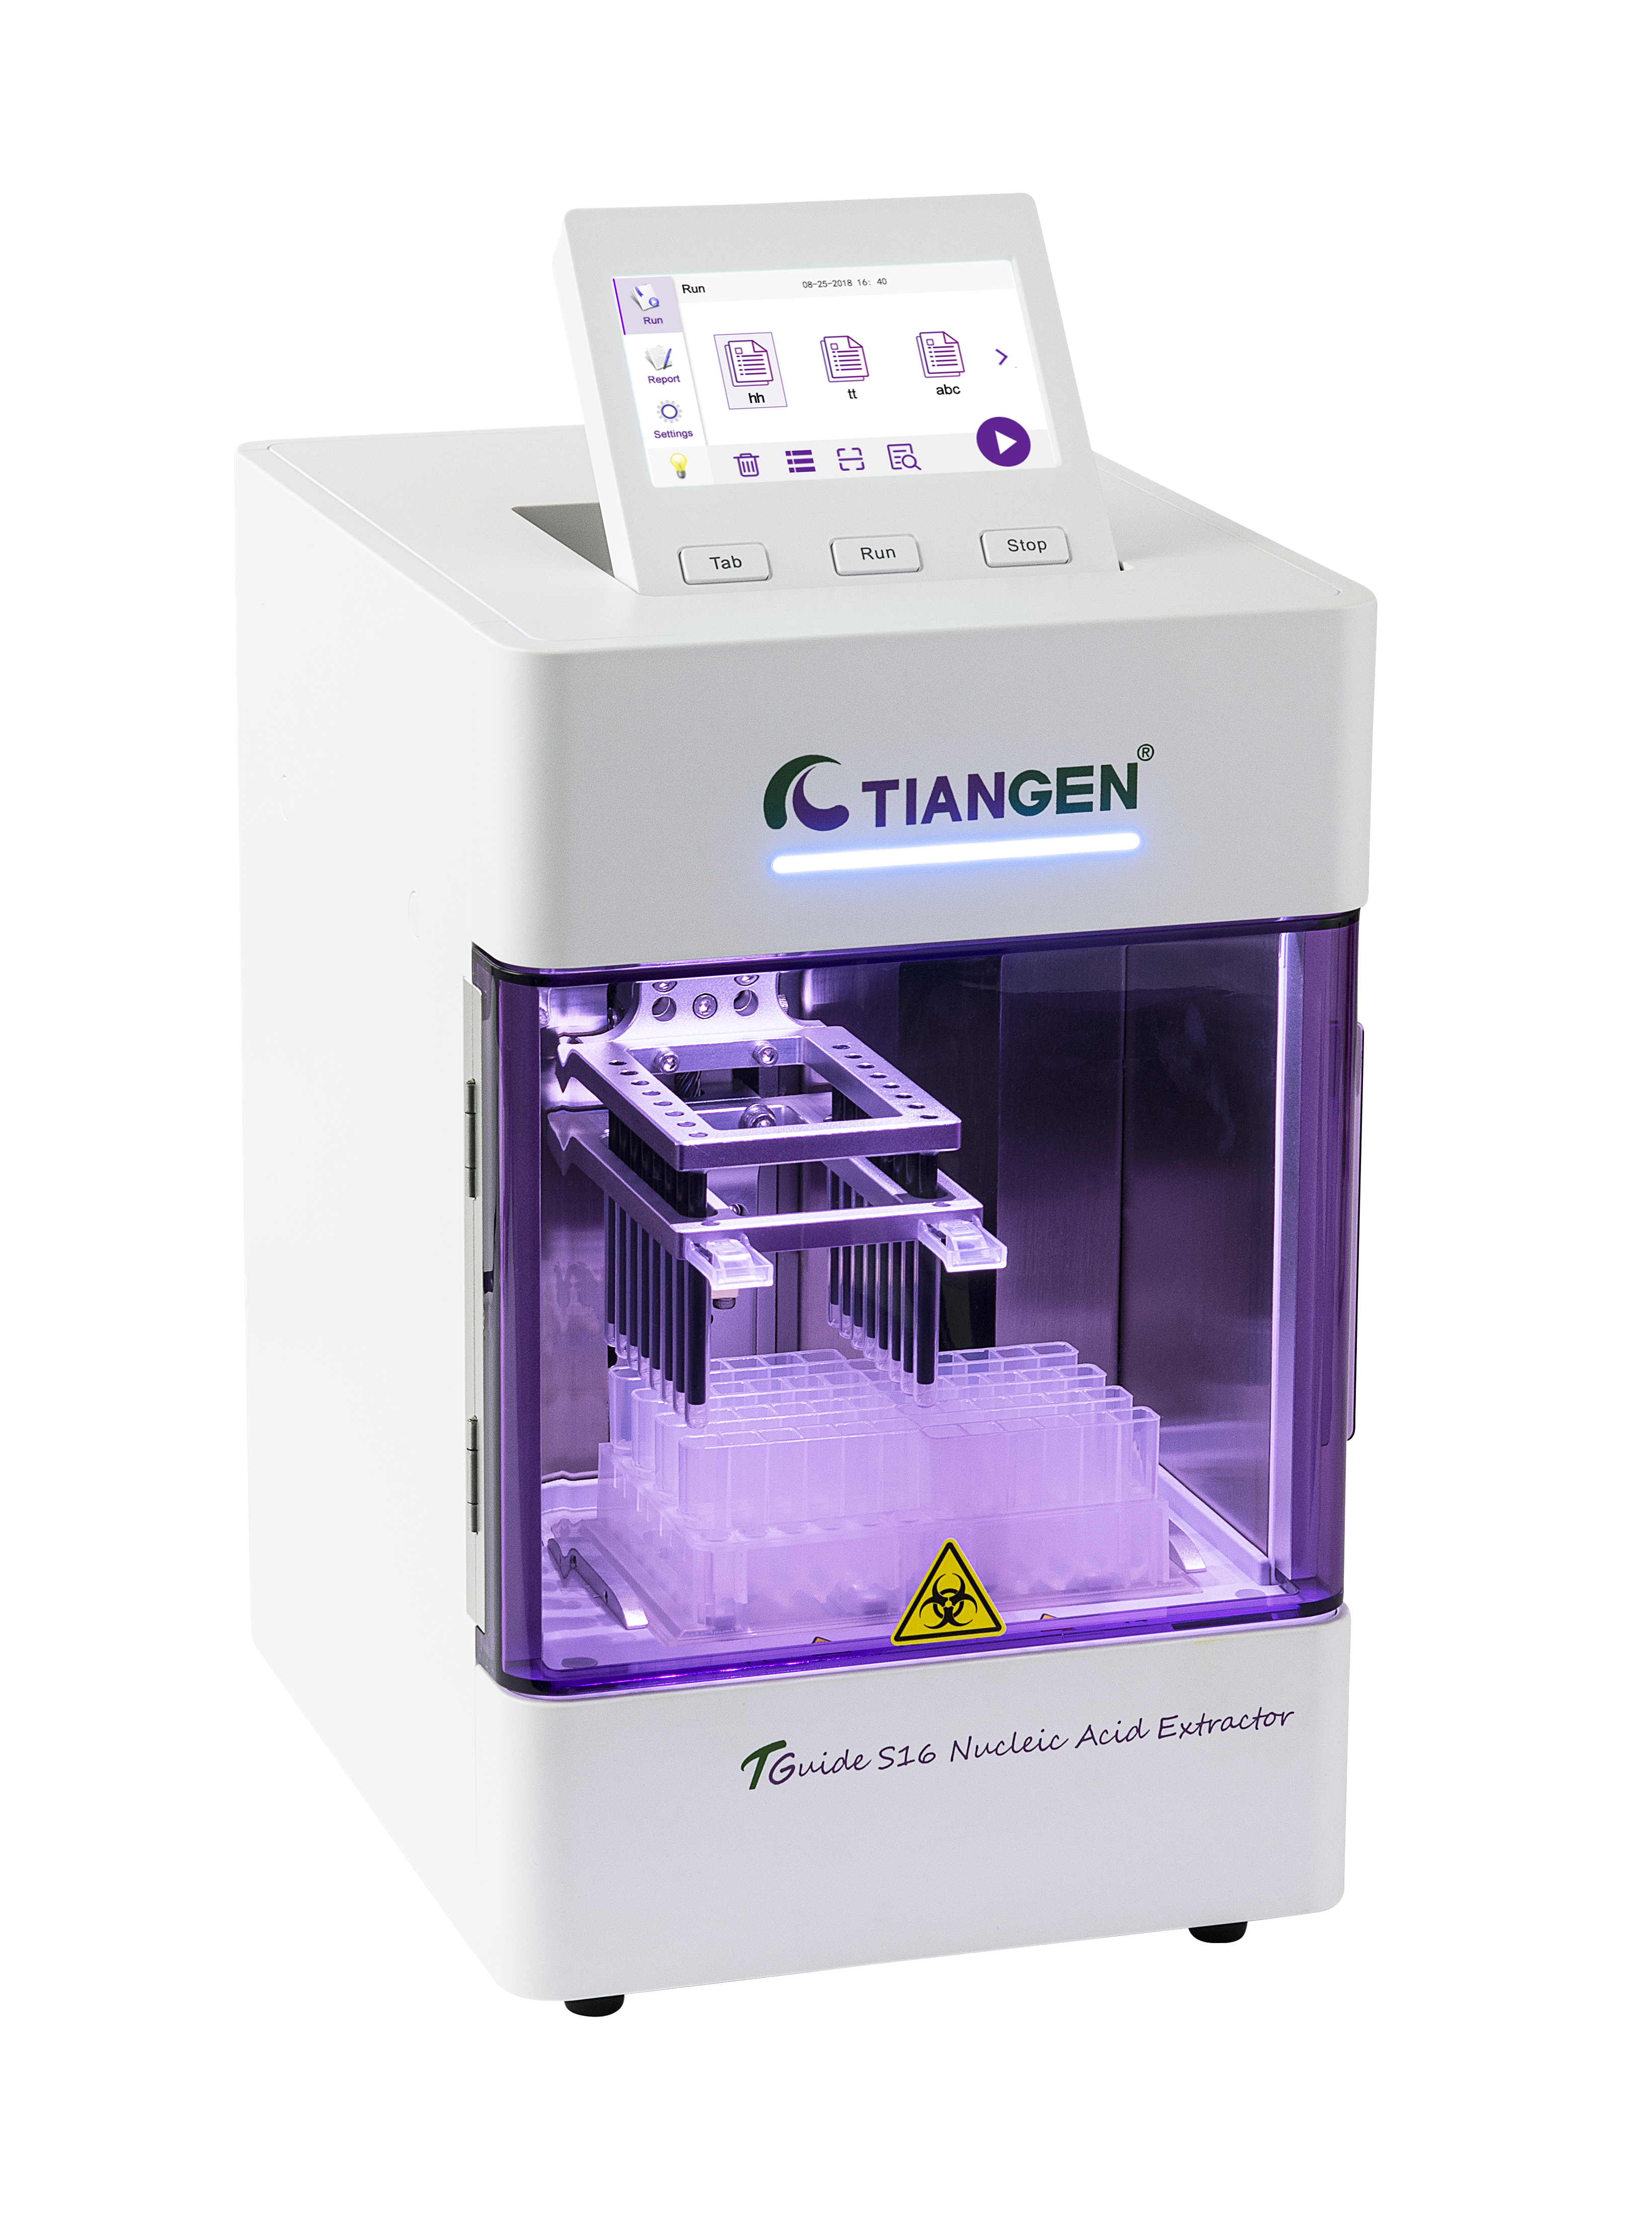 TGuide S16 Nucleic Acid Extractor